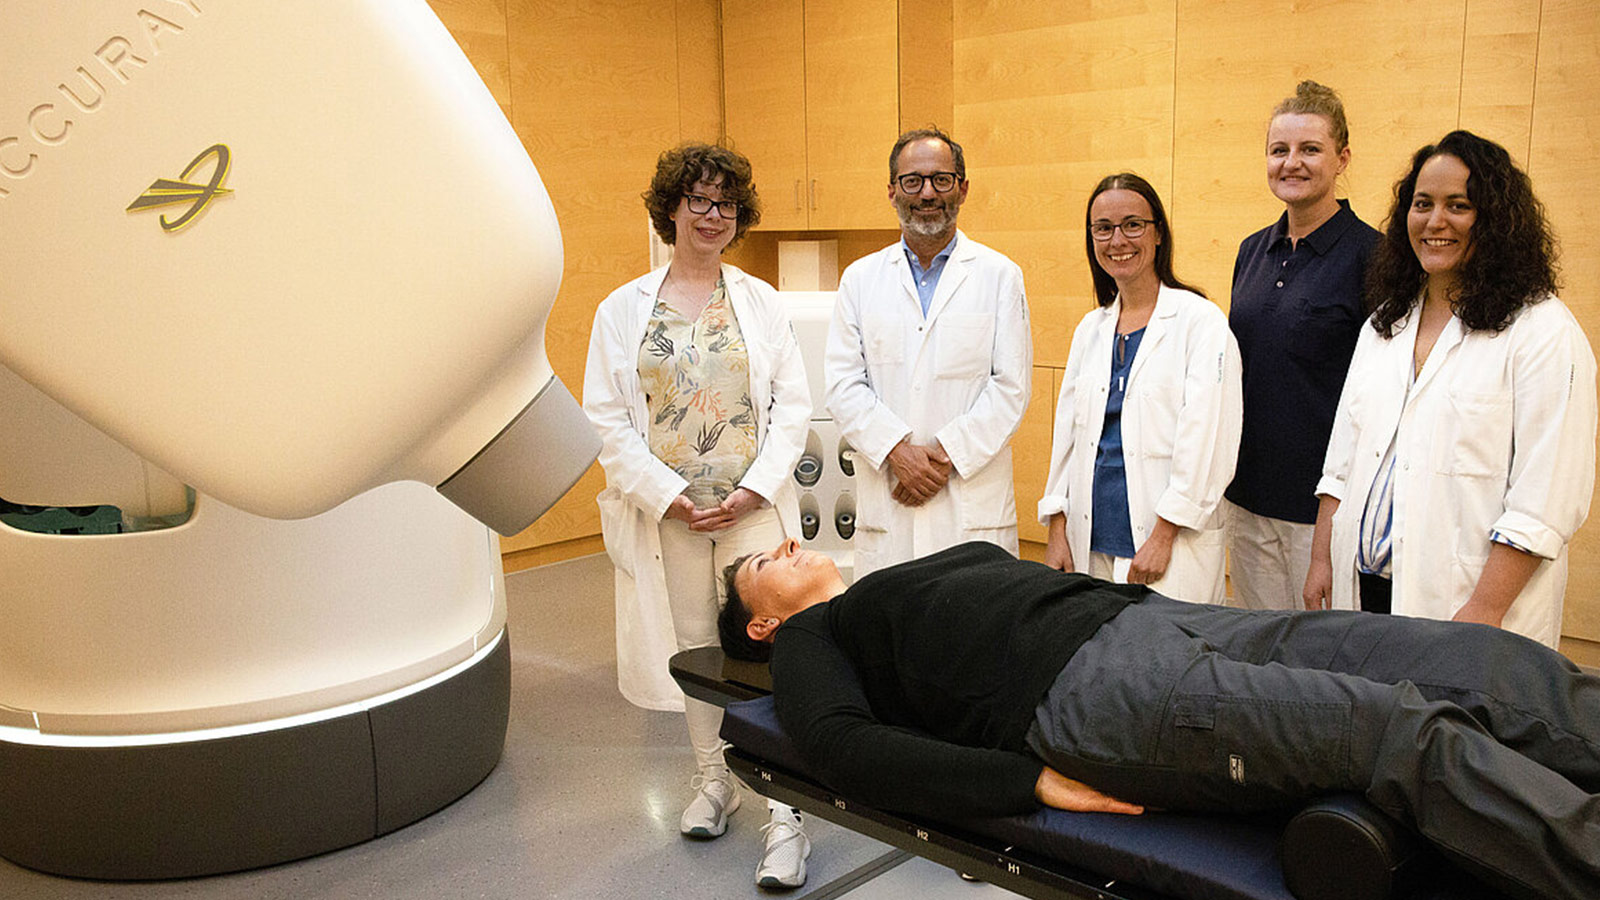 Photo of radiosurgery staff in front of the CyberKnife